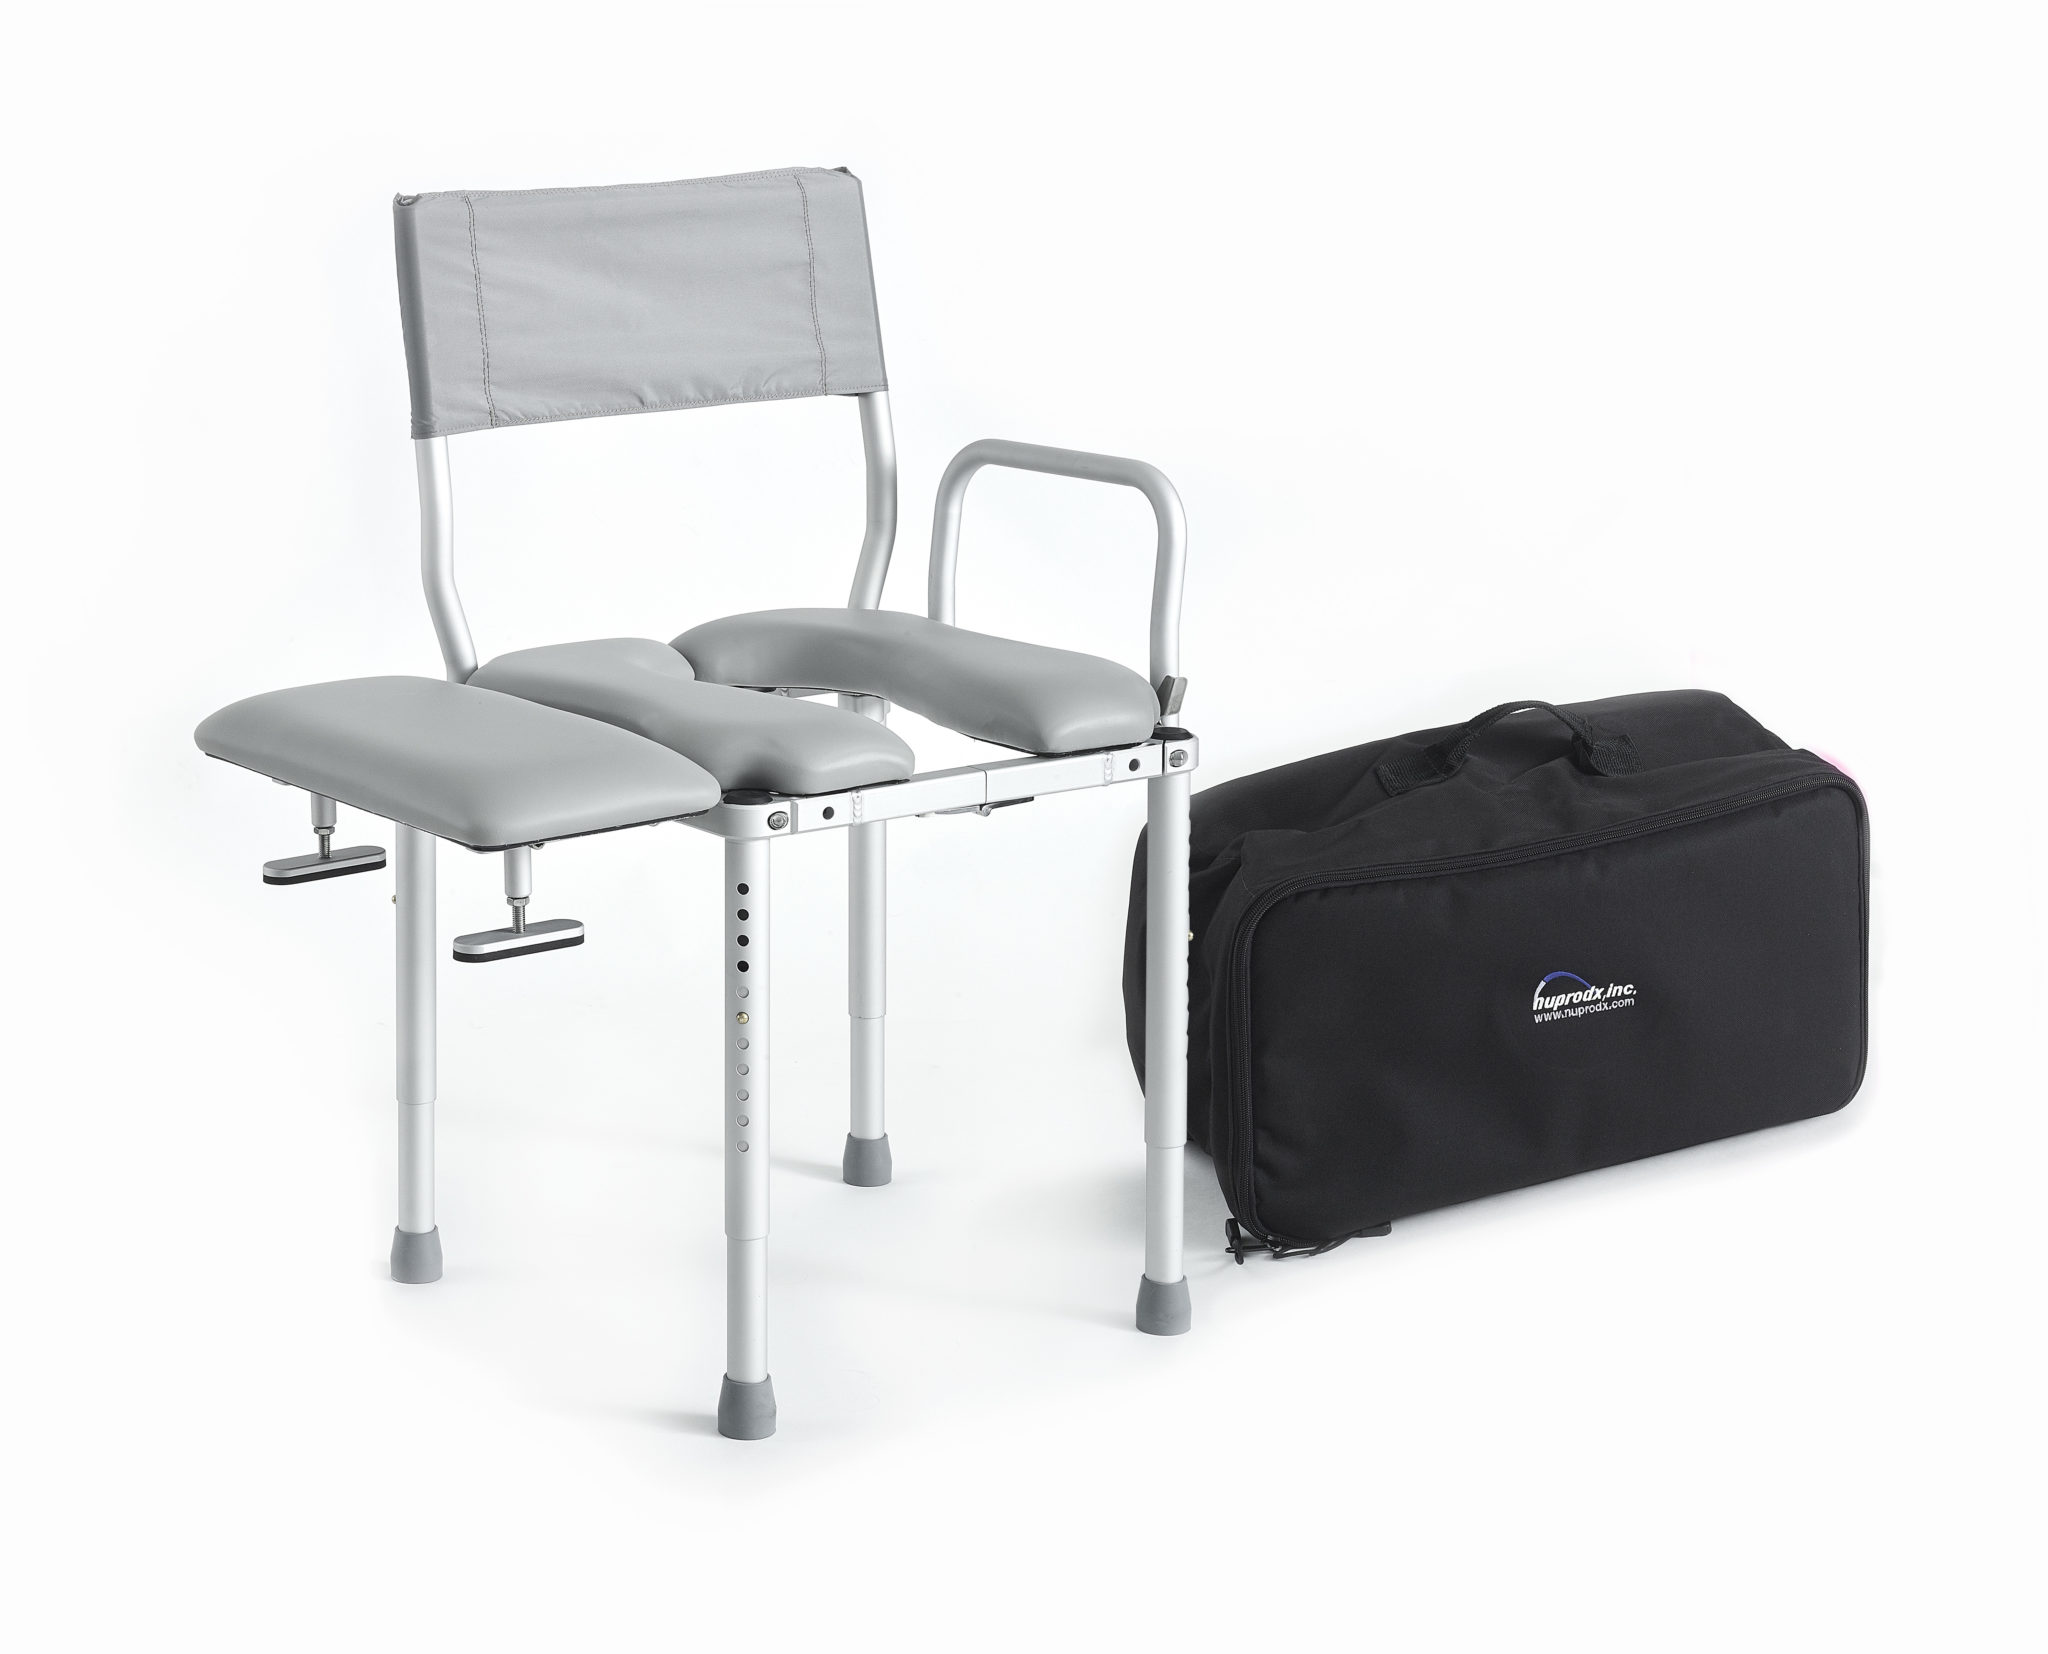 Mc3000tx Travel Commode Chair And Stationary Transfer Bench